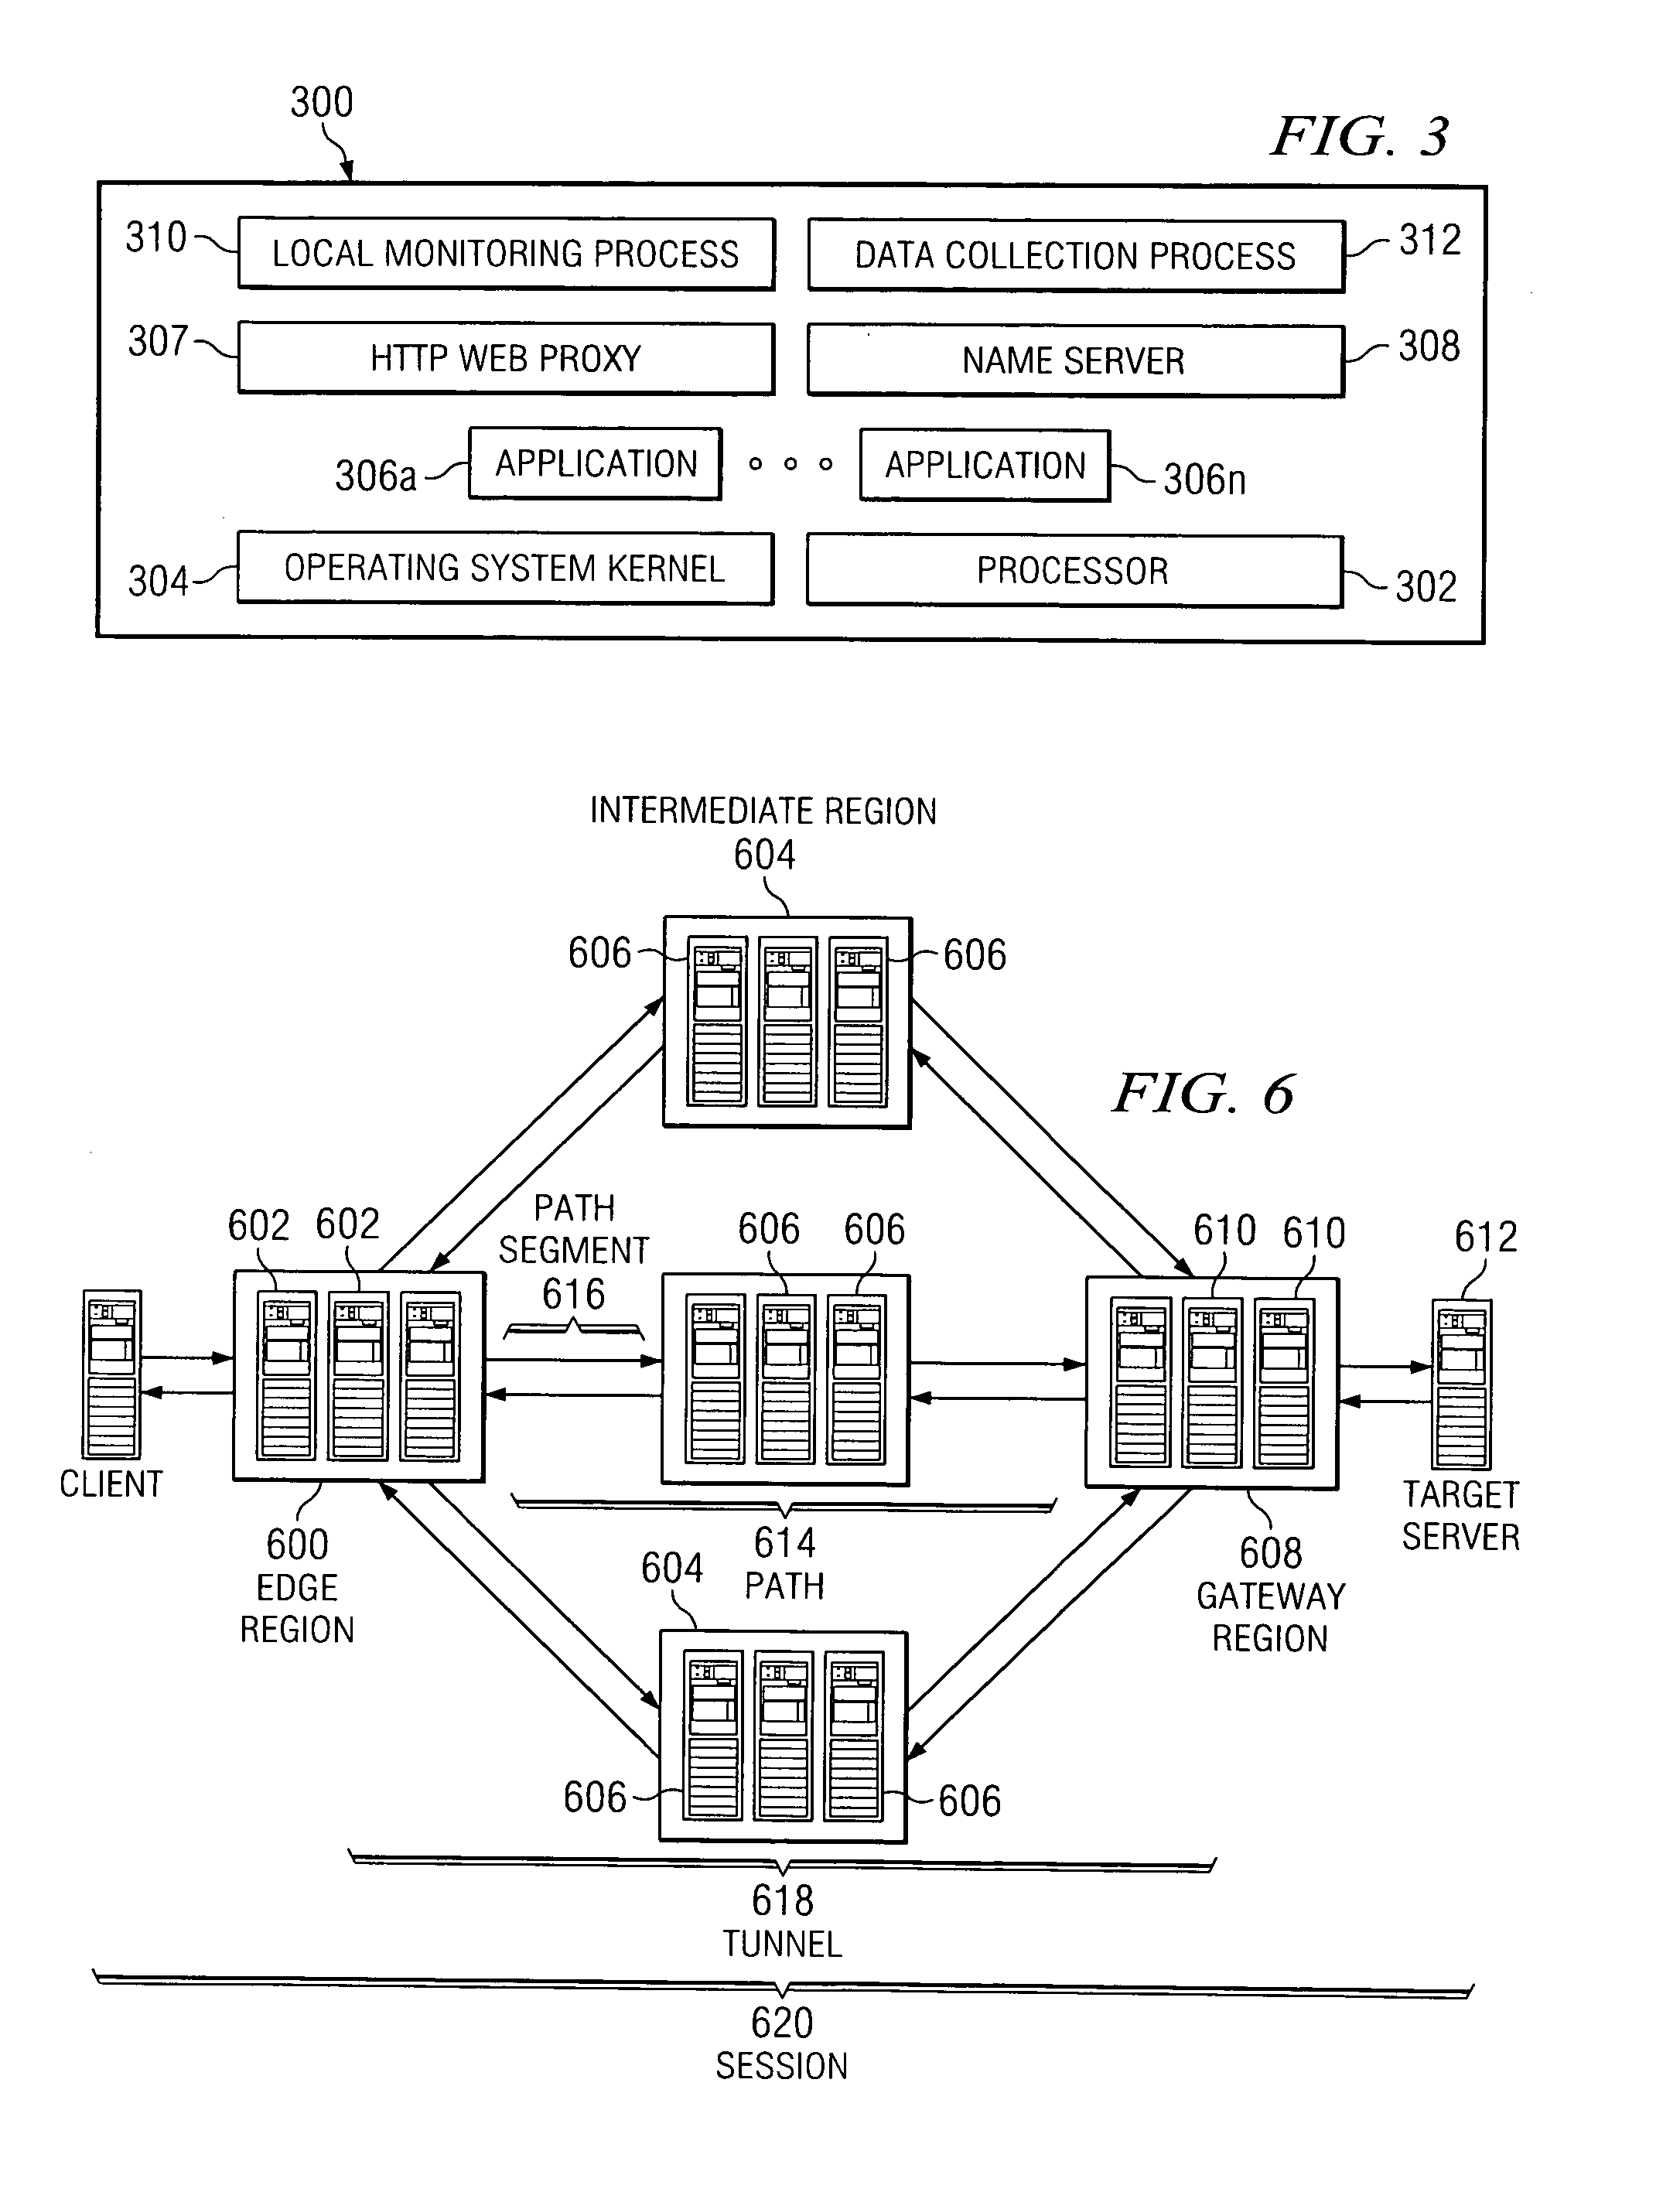 Reliable, high-throughput, high-performance transport and routing mechanism for arbitrary data flows